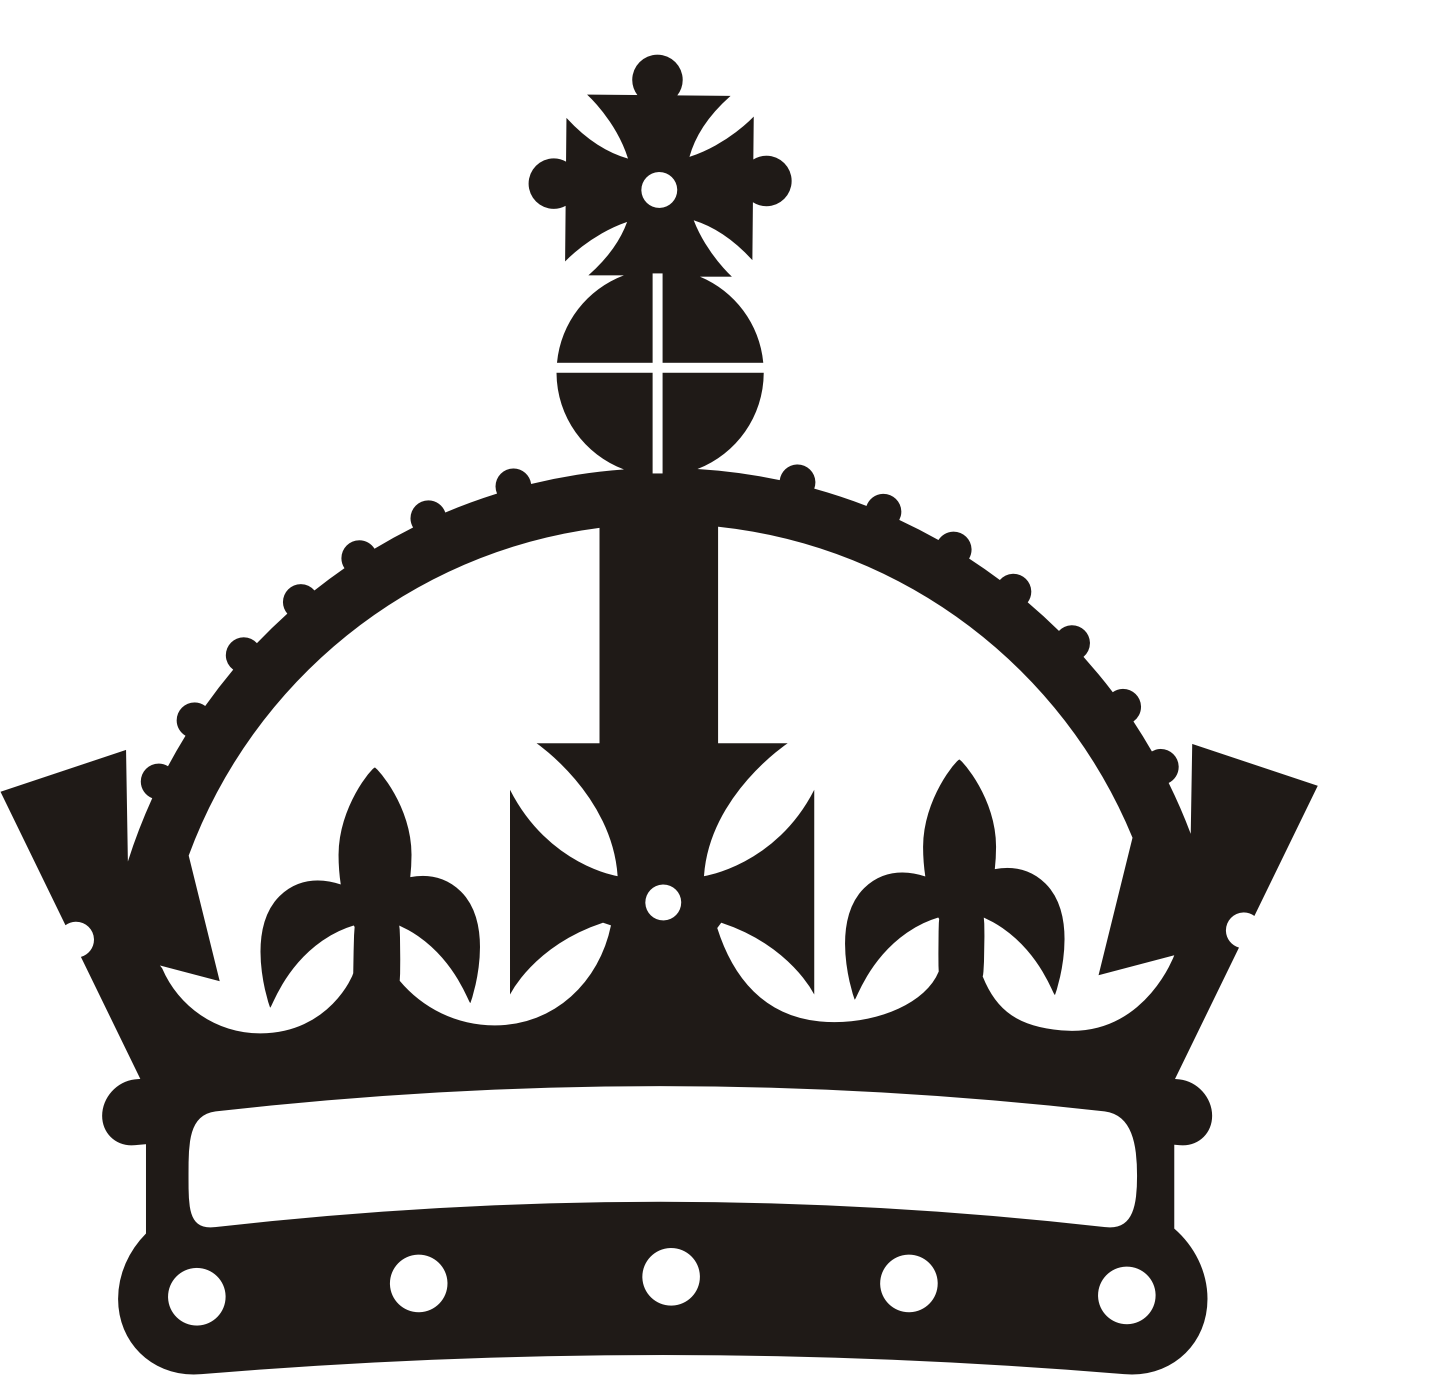 King And Queen Crowns Clipart.